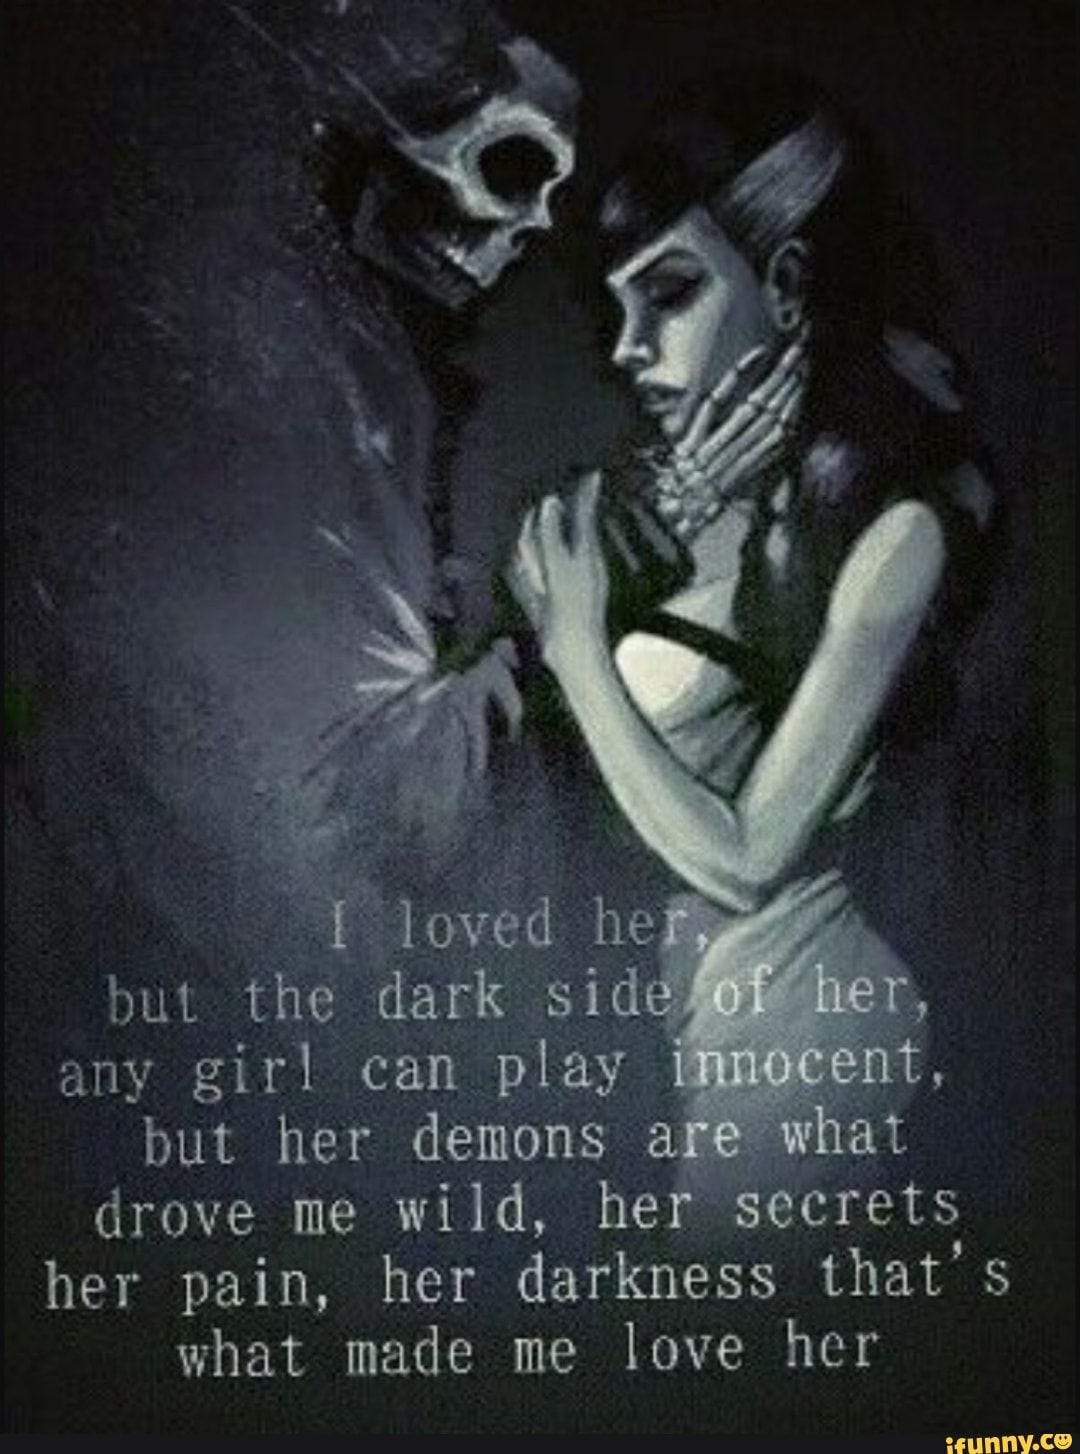 But the dark Sid; any girl can play but her demons . Q5 wild, he *secrets  her pain, her darkness that' s what made me love her - iFunny | Dark soul